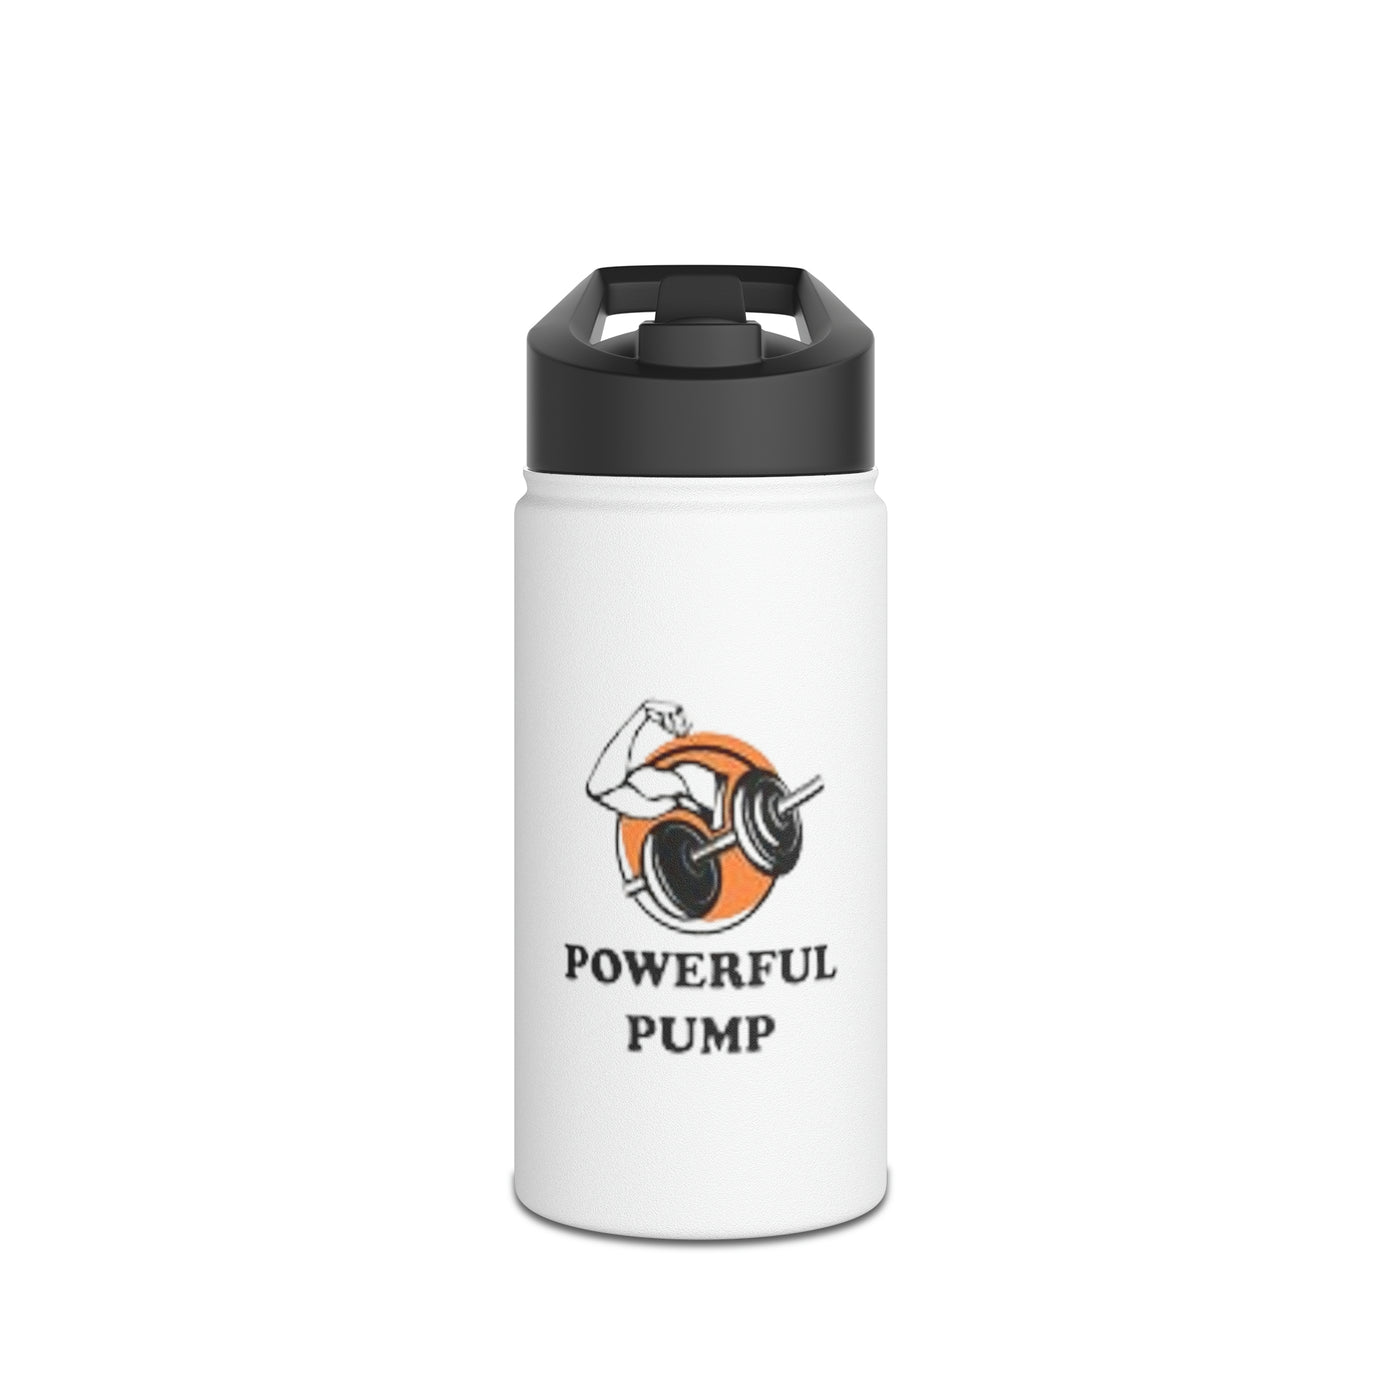  Fitness Stainless Steel Water Bottle with Standard Lid - Reusable and durable stainless steel bottle designed for fitness use, featuring a standard lid for convenient hydration during workouts and daily activities.